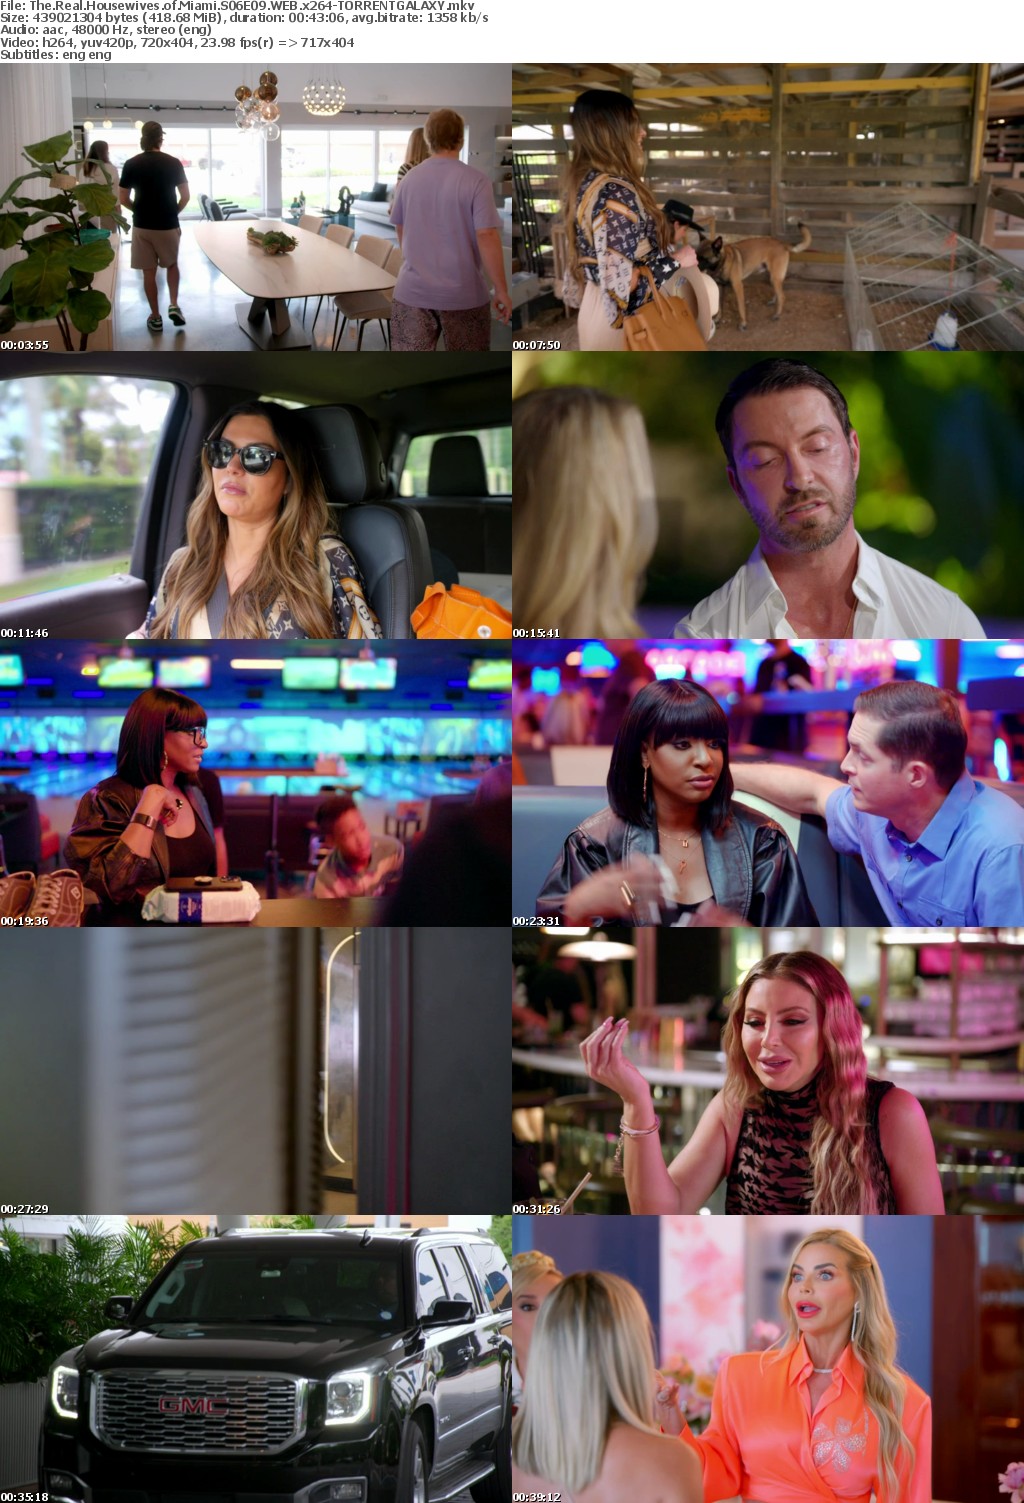 The Real Housewives of Miami S06E09 WEB x264-GALAXY